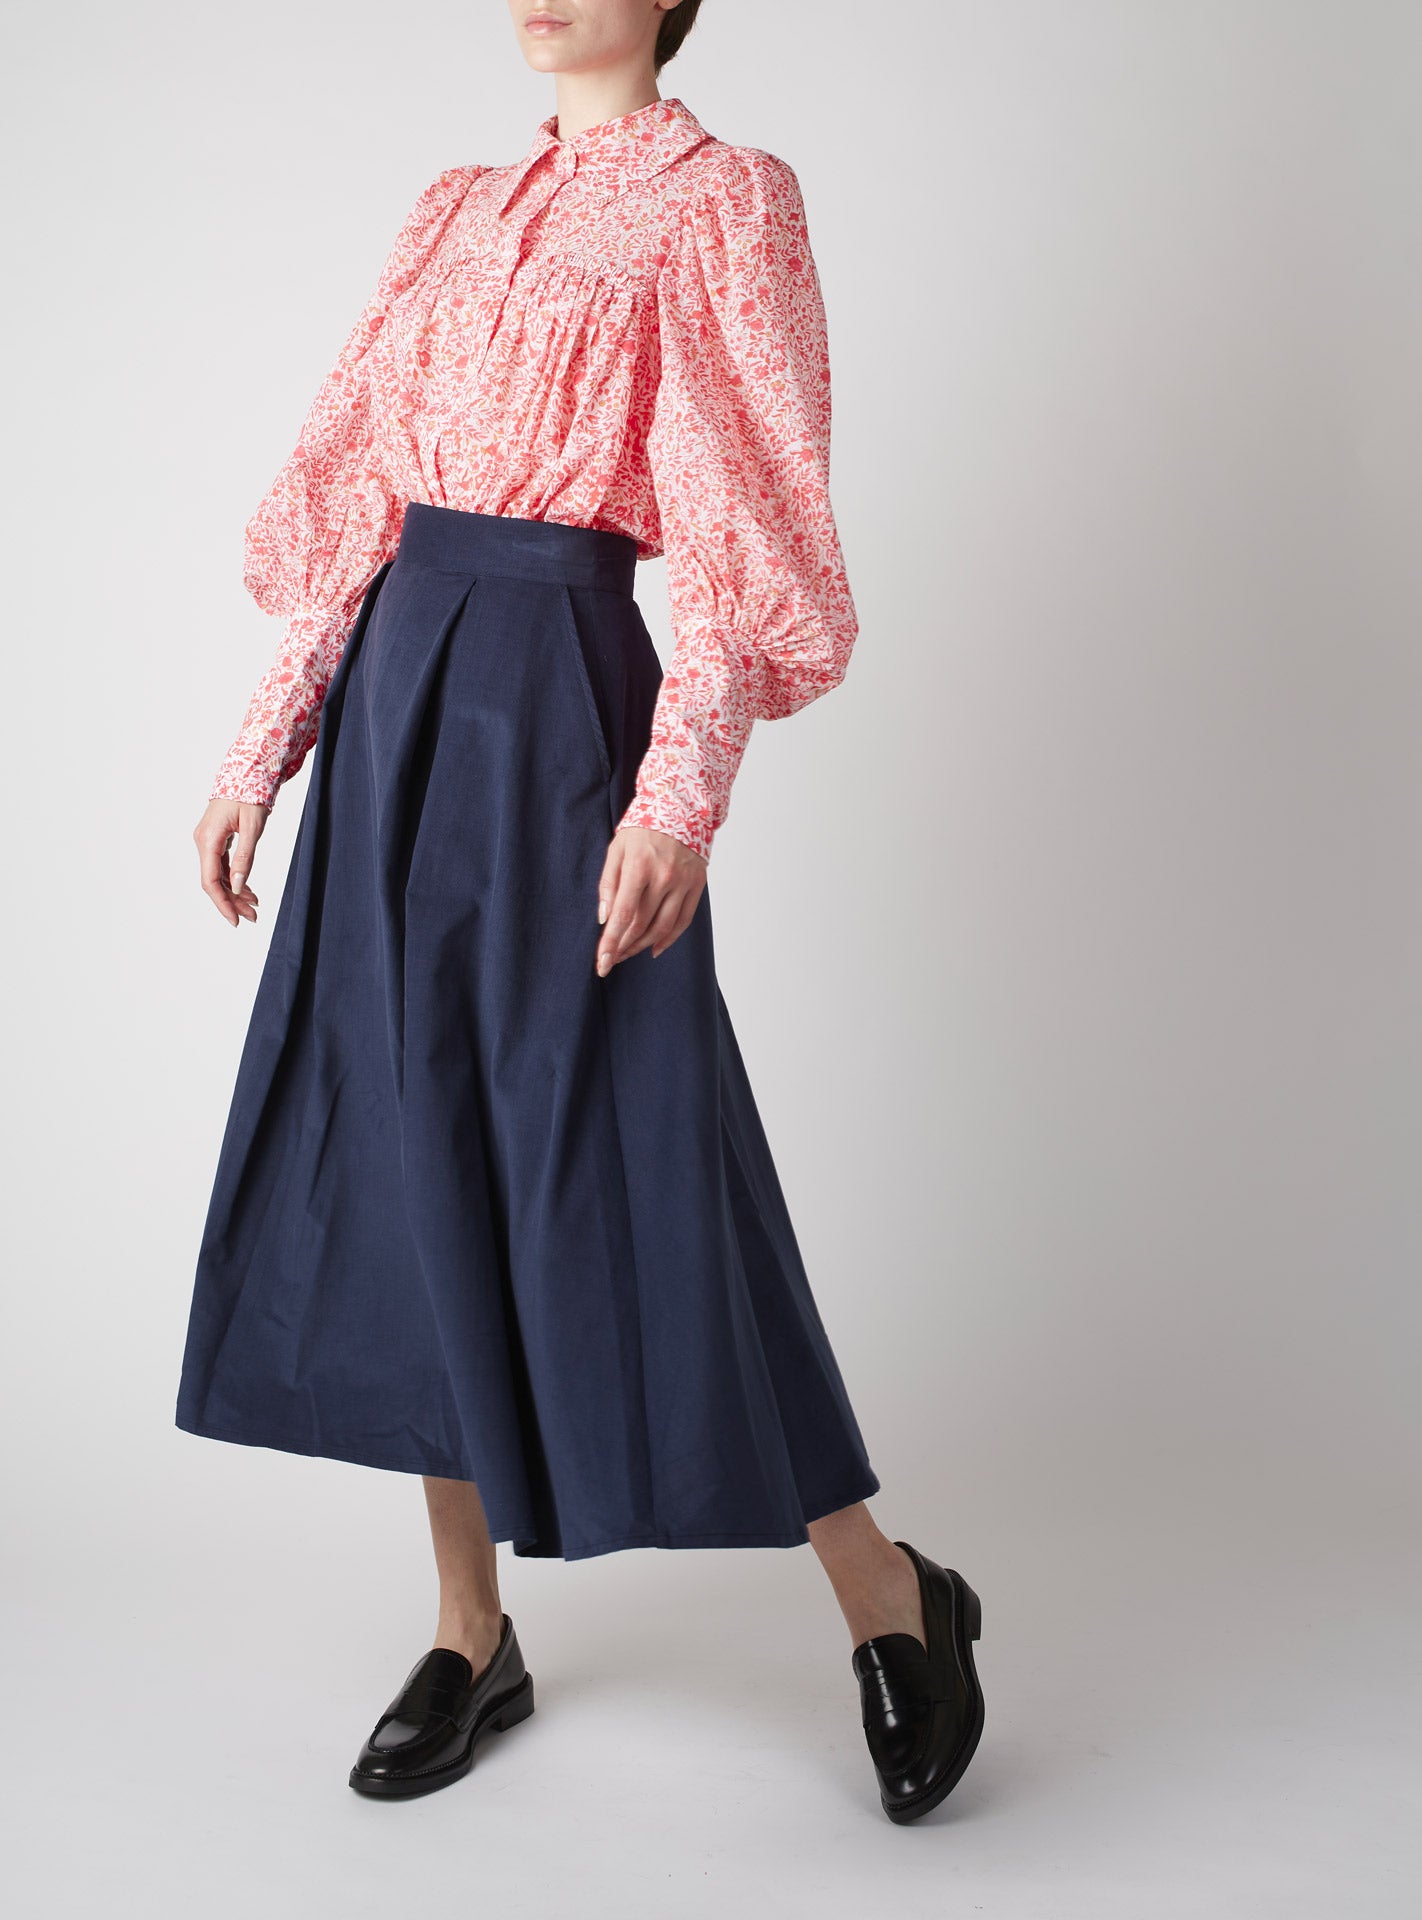 Large view of Wallis Raspberry Floral Jaal Blouse with a Wynona skirt by Thierry Colson